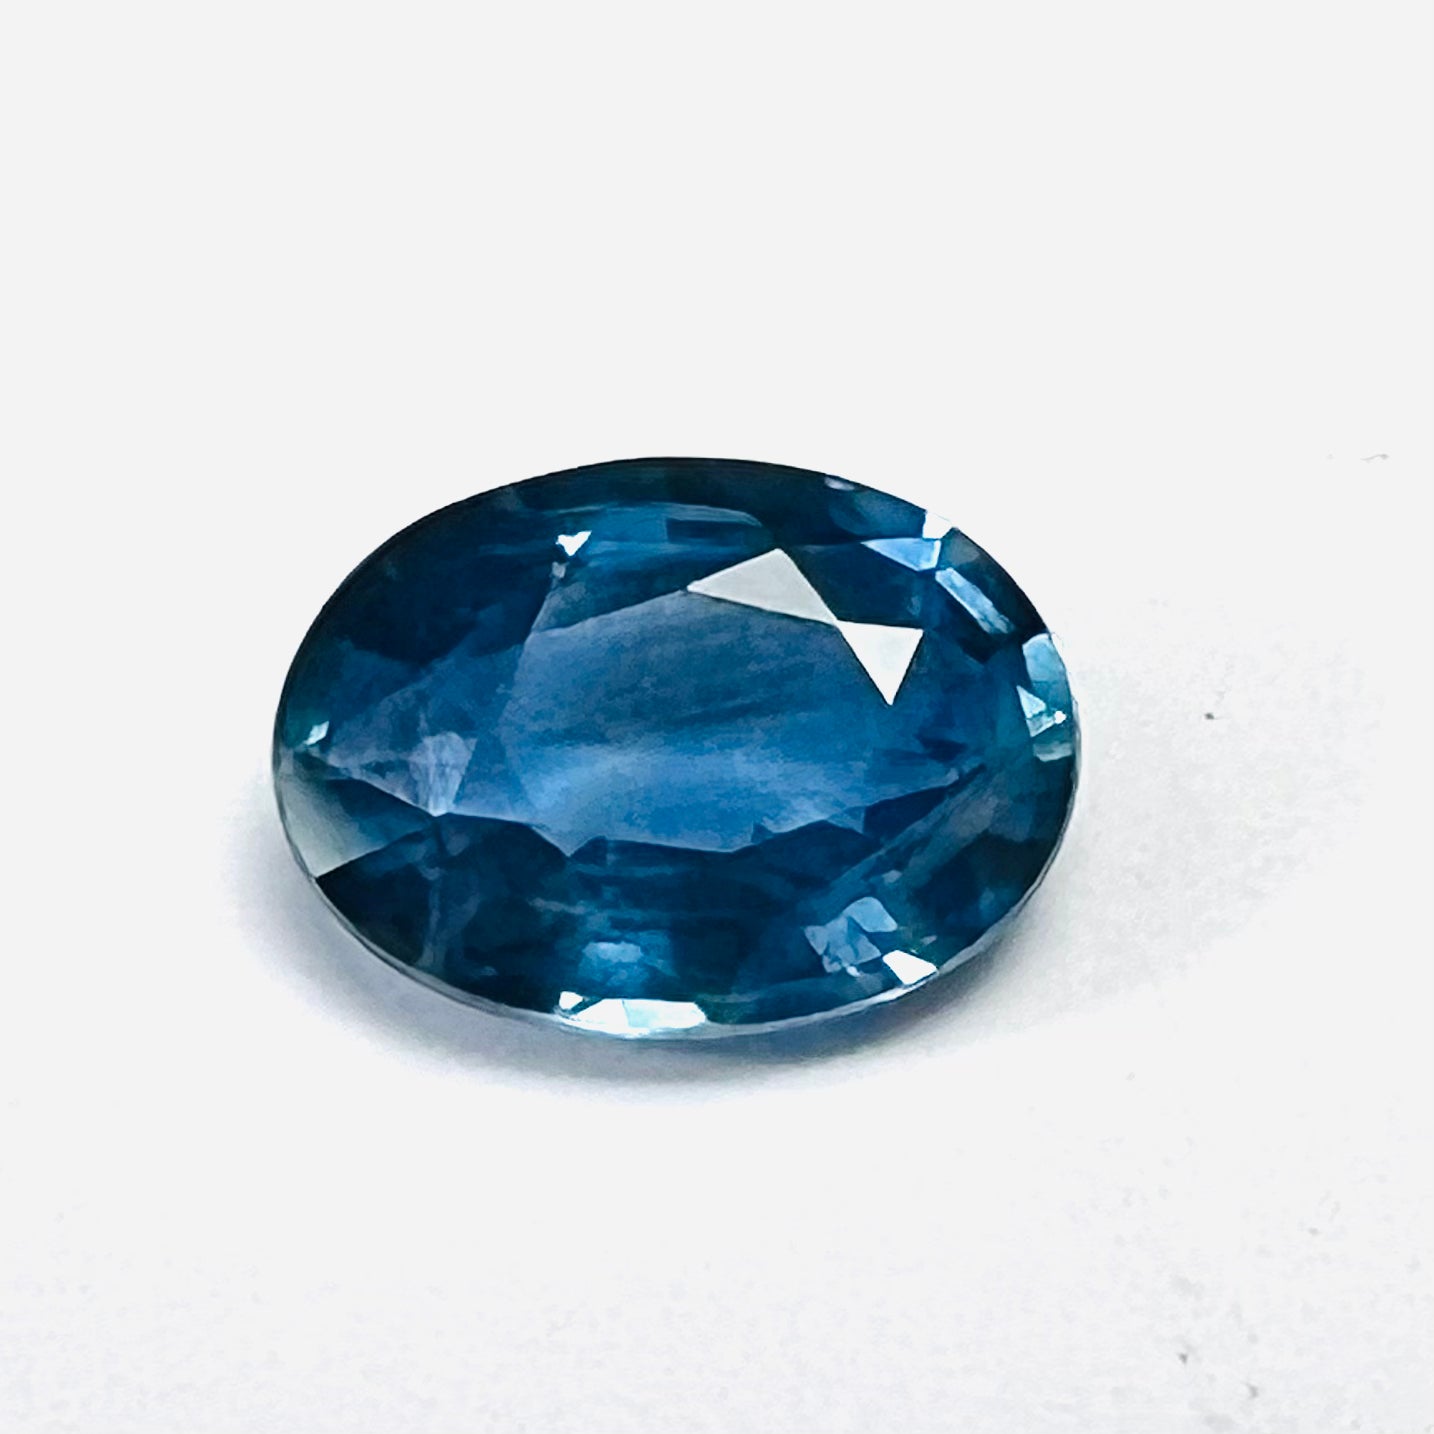 .88CTW Loose Oval Blue Sapphire 6.97x5.1x2.88mm Earth mined Gemstone